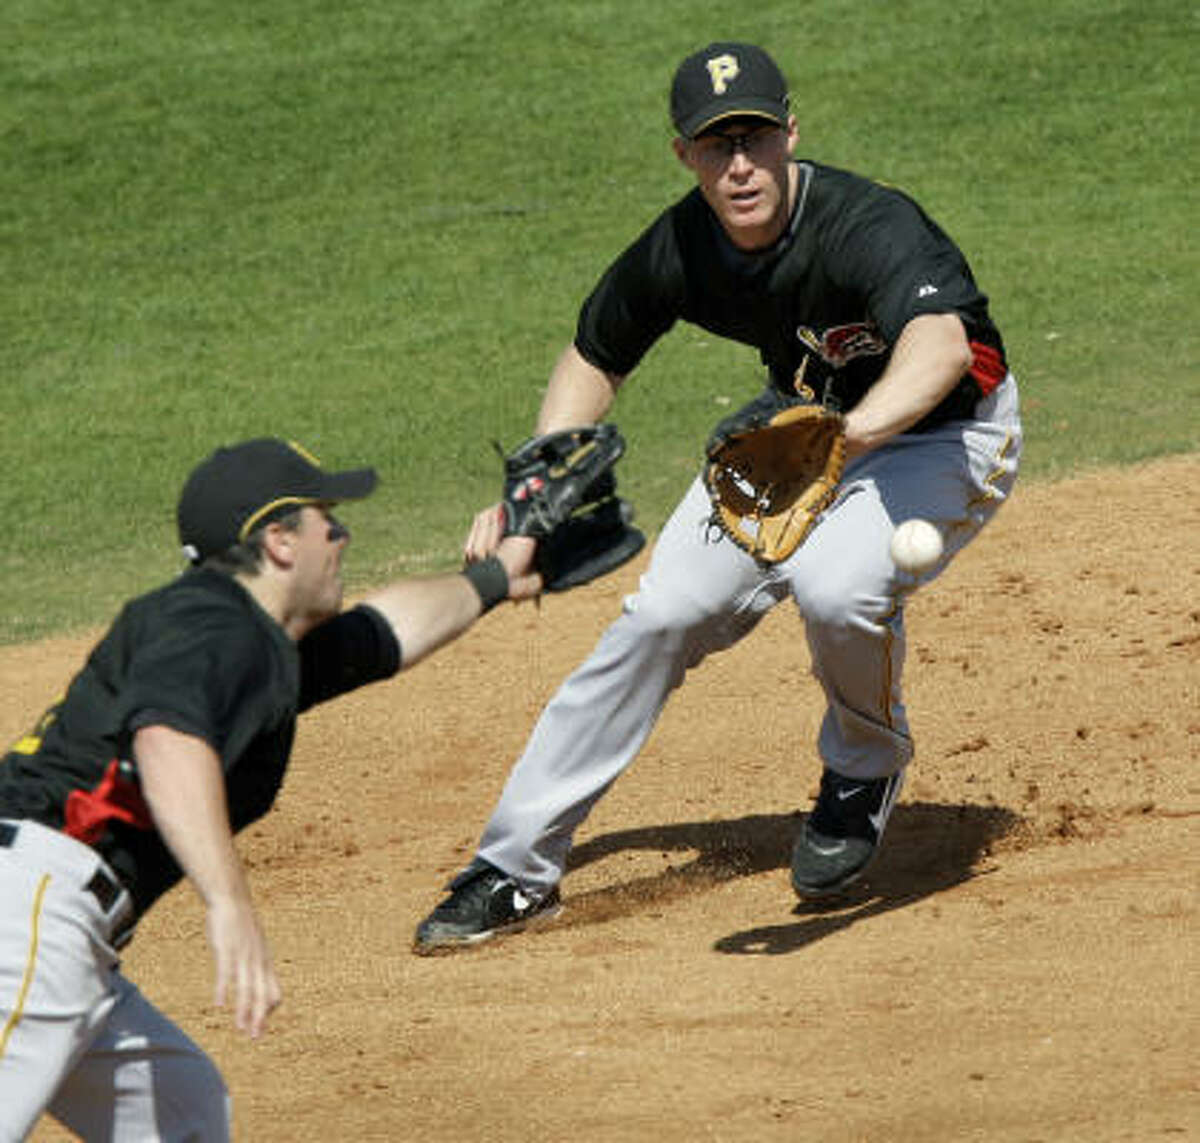 Pittsburgh Pirates shortstop Brian Bixler, right, fields a ball hit by Houston Astros' Darin Erstad as Pirates third baseman Andy LaRoche, left, reaches for the ball.